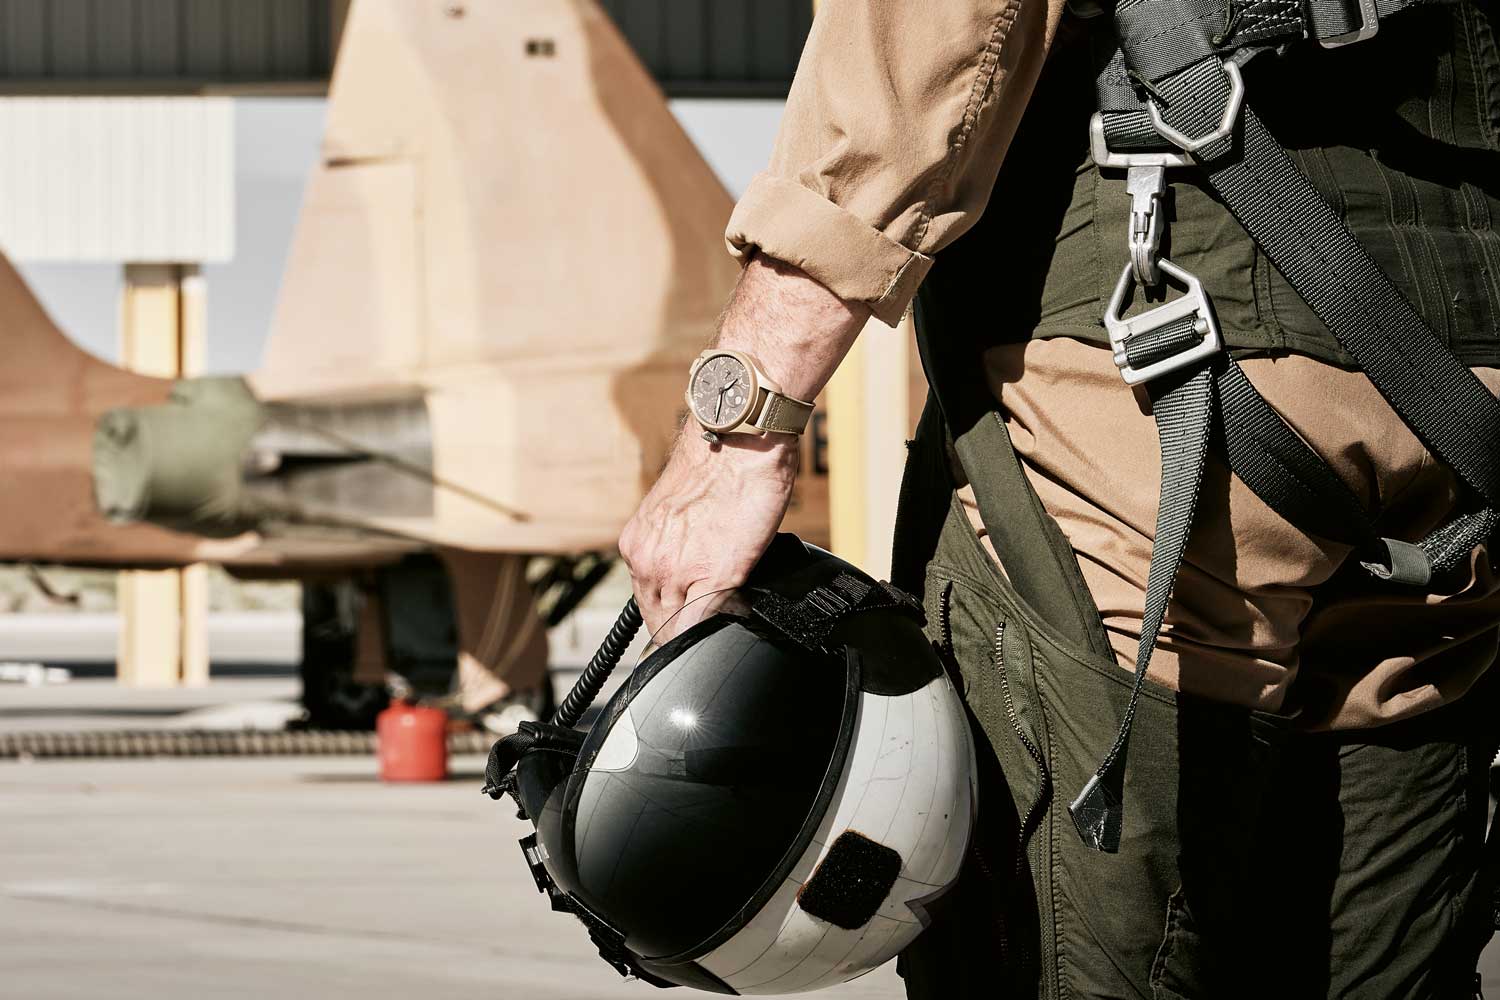 The IWC Big Pilot line sees a new iteration this year in the Perpetual Calendar TOP GUN Edition “Mojave Desert”. With a case size of 46.5mm, it is the ultimate Pilot's Watch